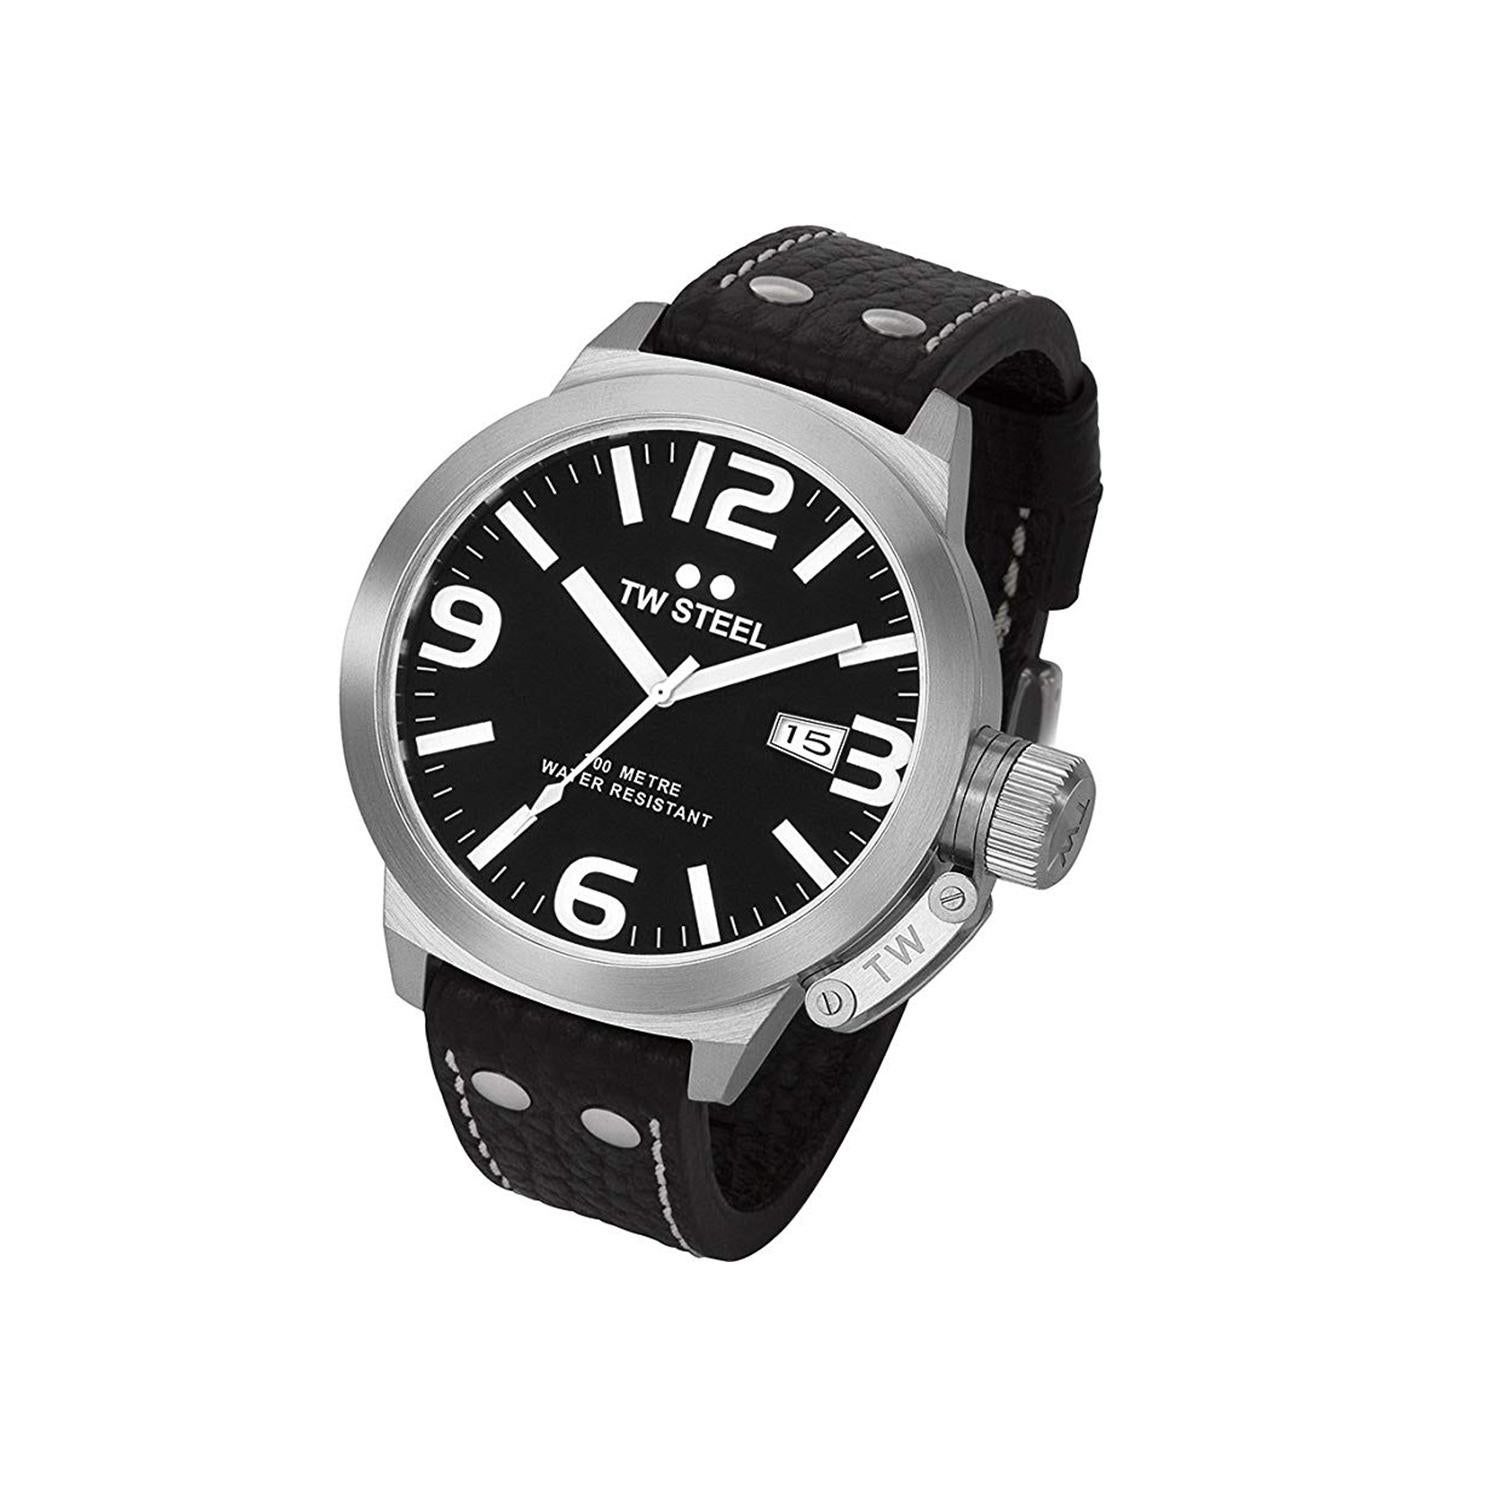 Store display Model.
Comes with original box and papers.
Black leather band
Stainless steel case
Black dial; Date display
Scratch resistant mineral
Water resistant to 330 feet (100 M): suitable for snorkeling, as well as swimming, but not